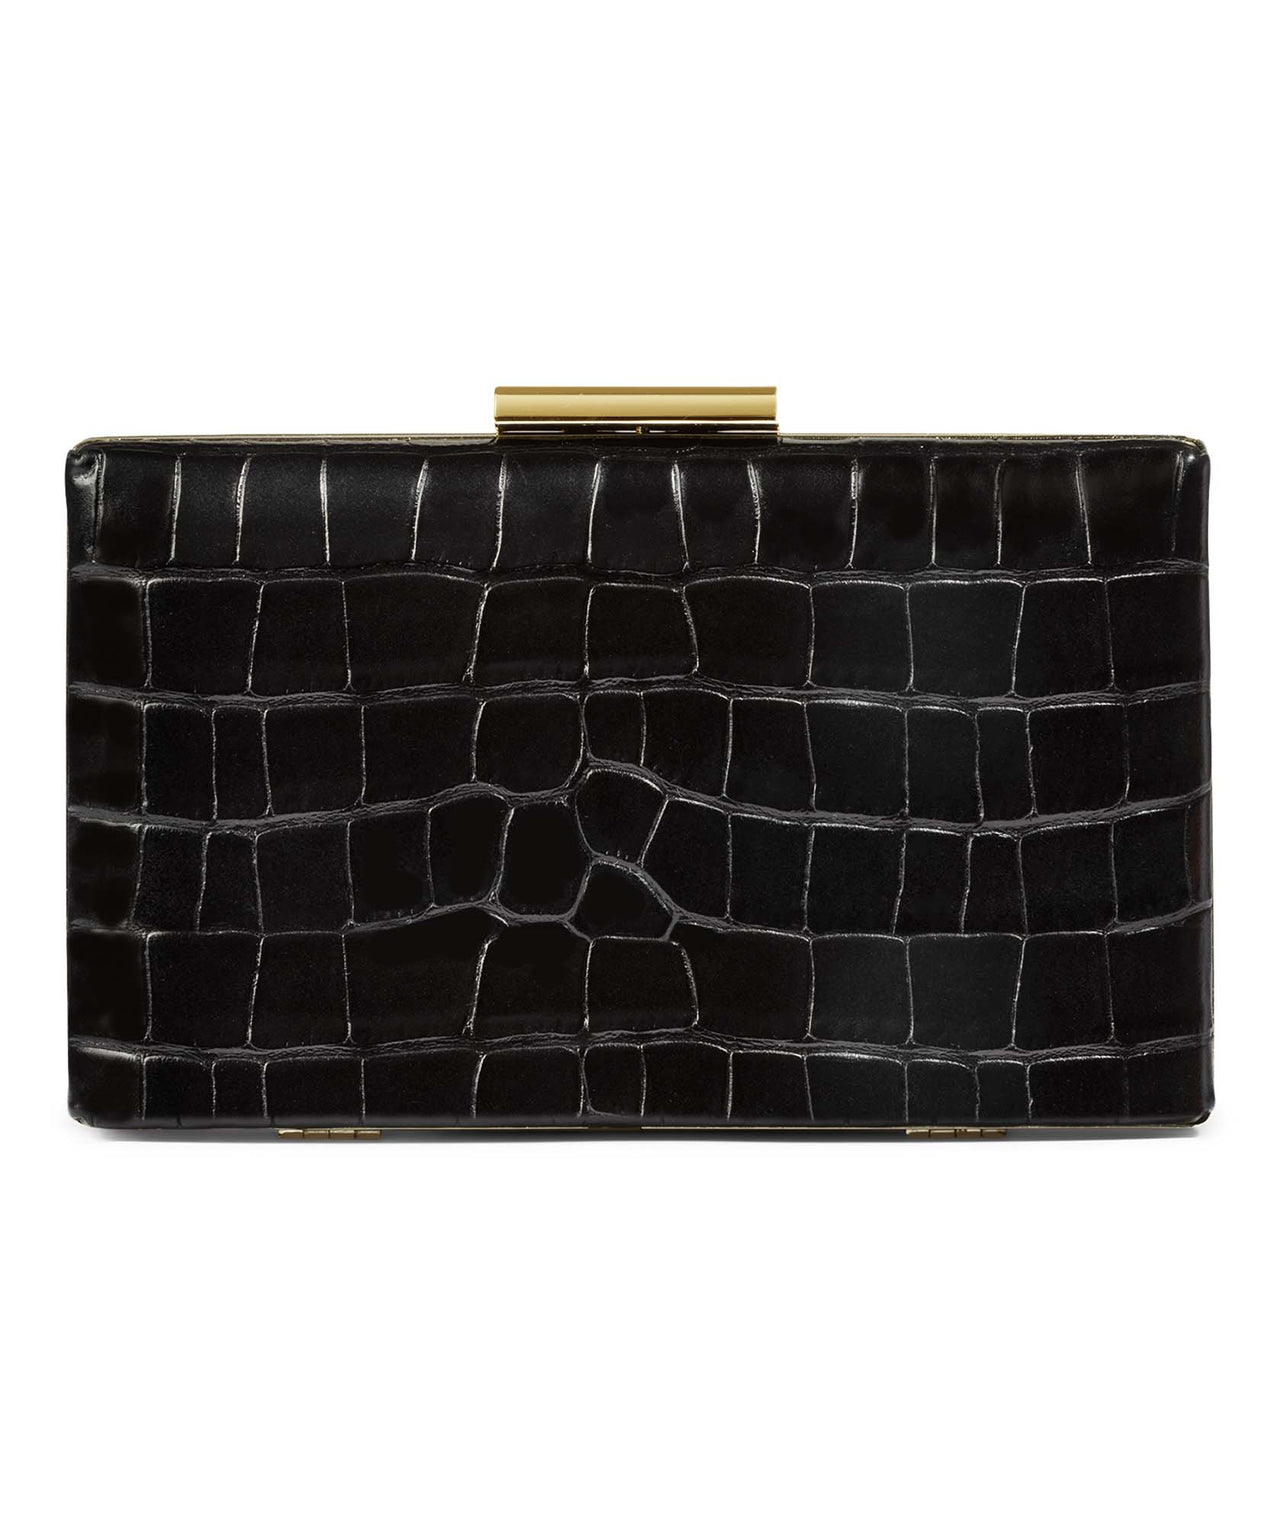 Hard Case Clutch Bags - Stunning & Sophisticated | XY London